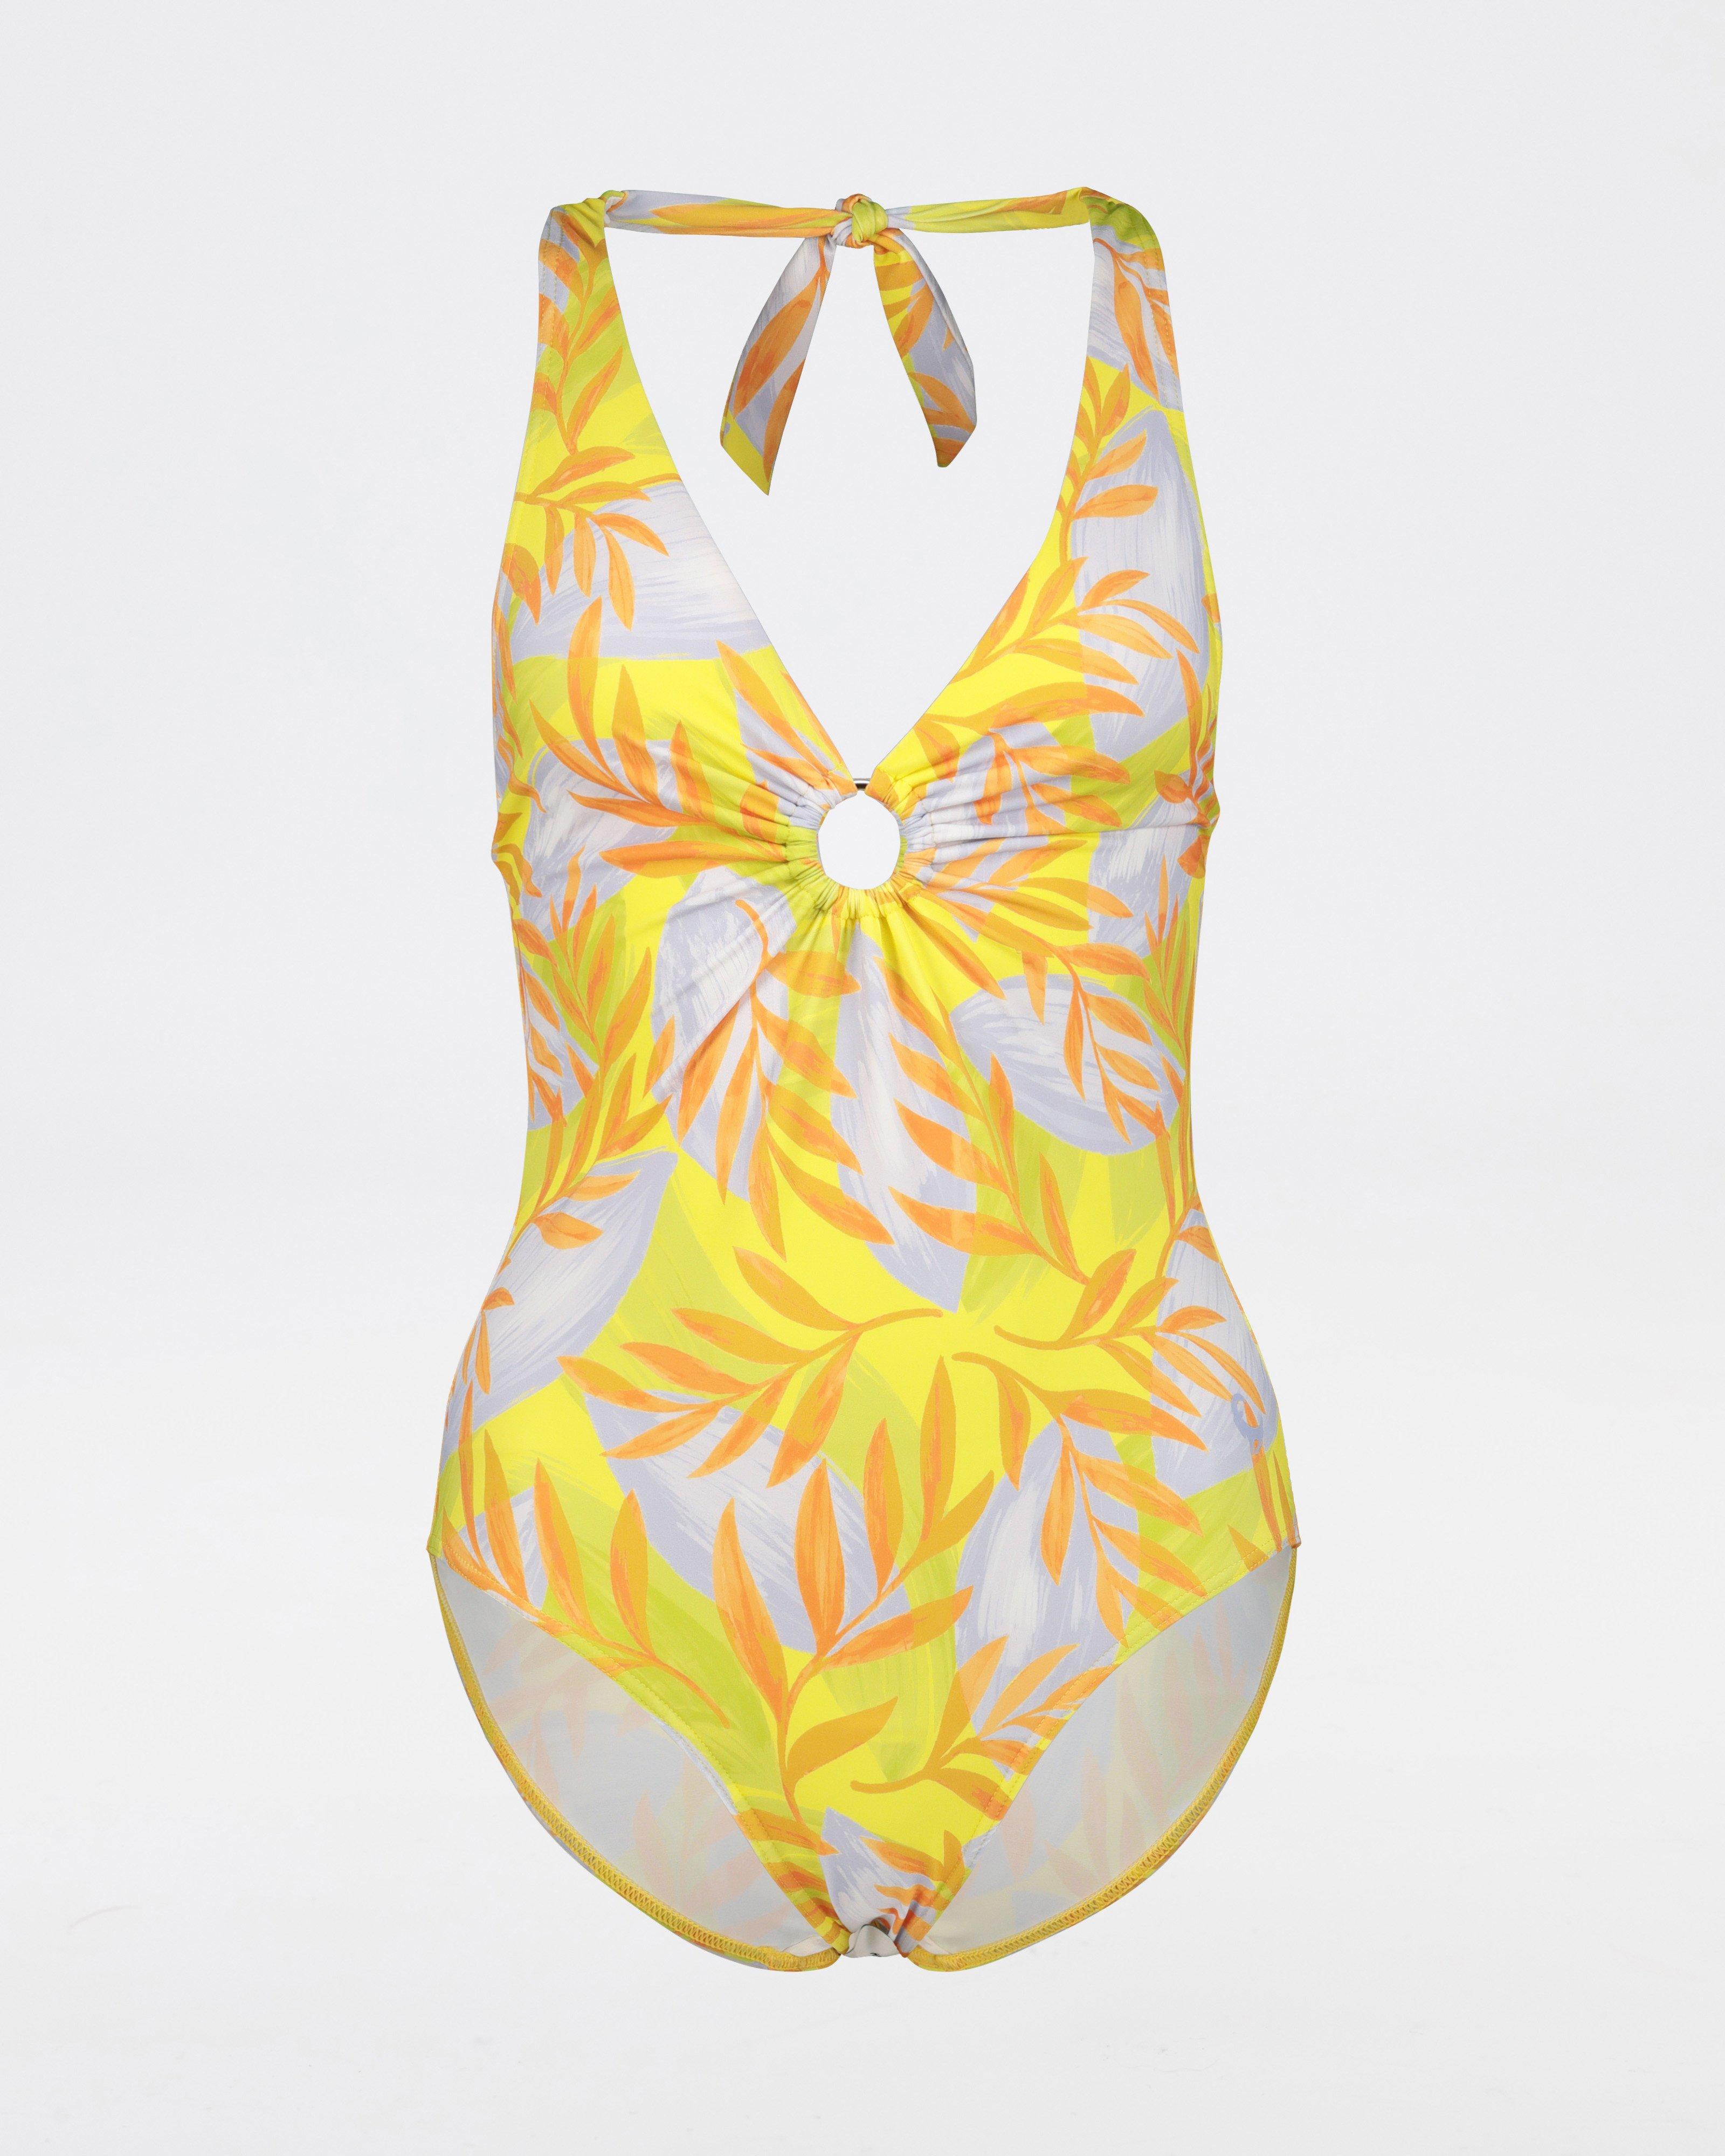  Rio Halter One-Piece Swimsuit -  Chartreuse